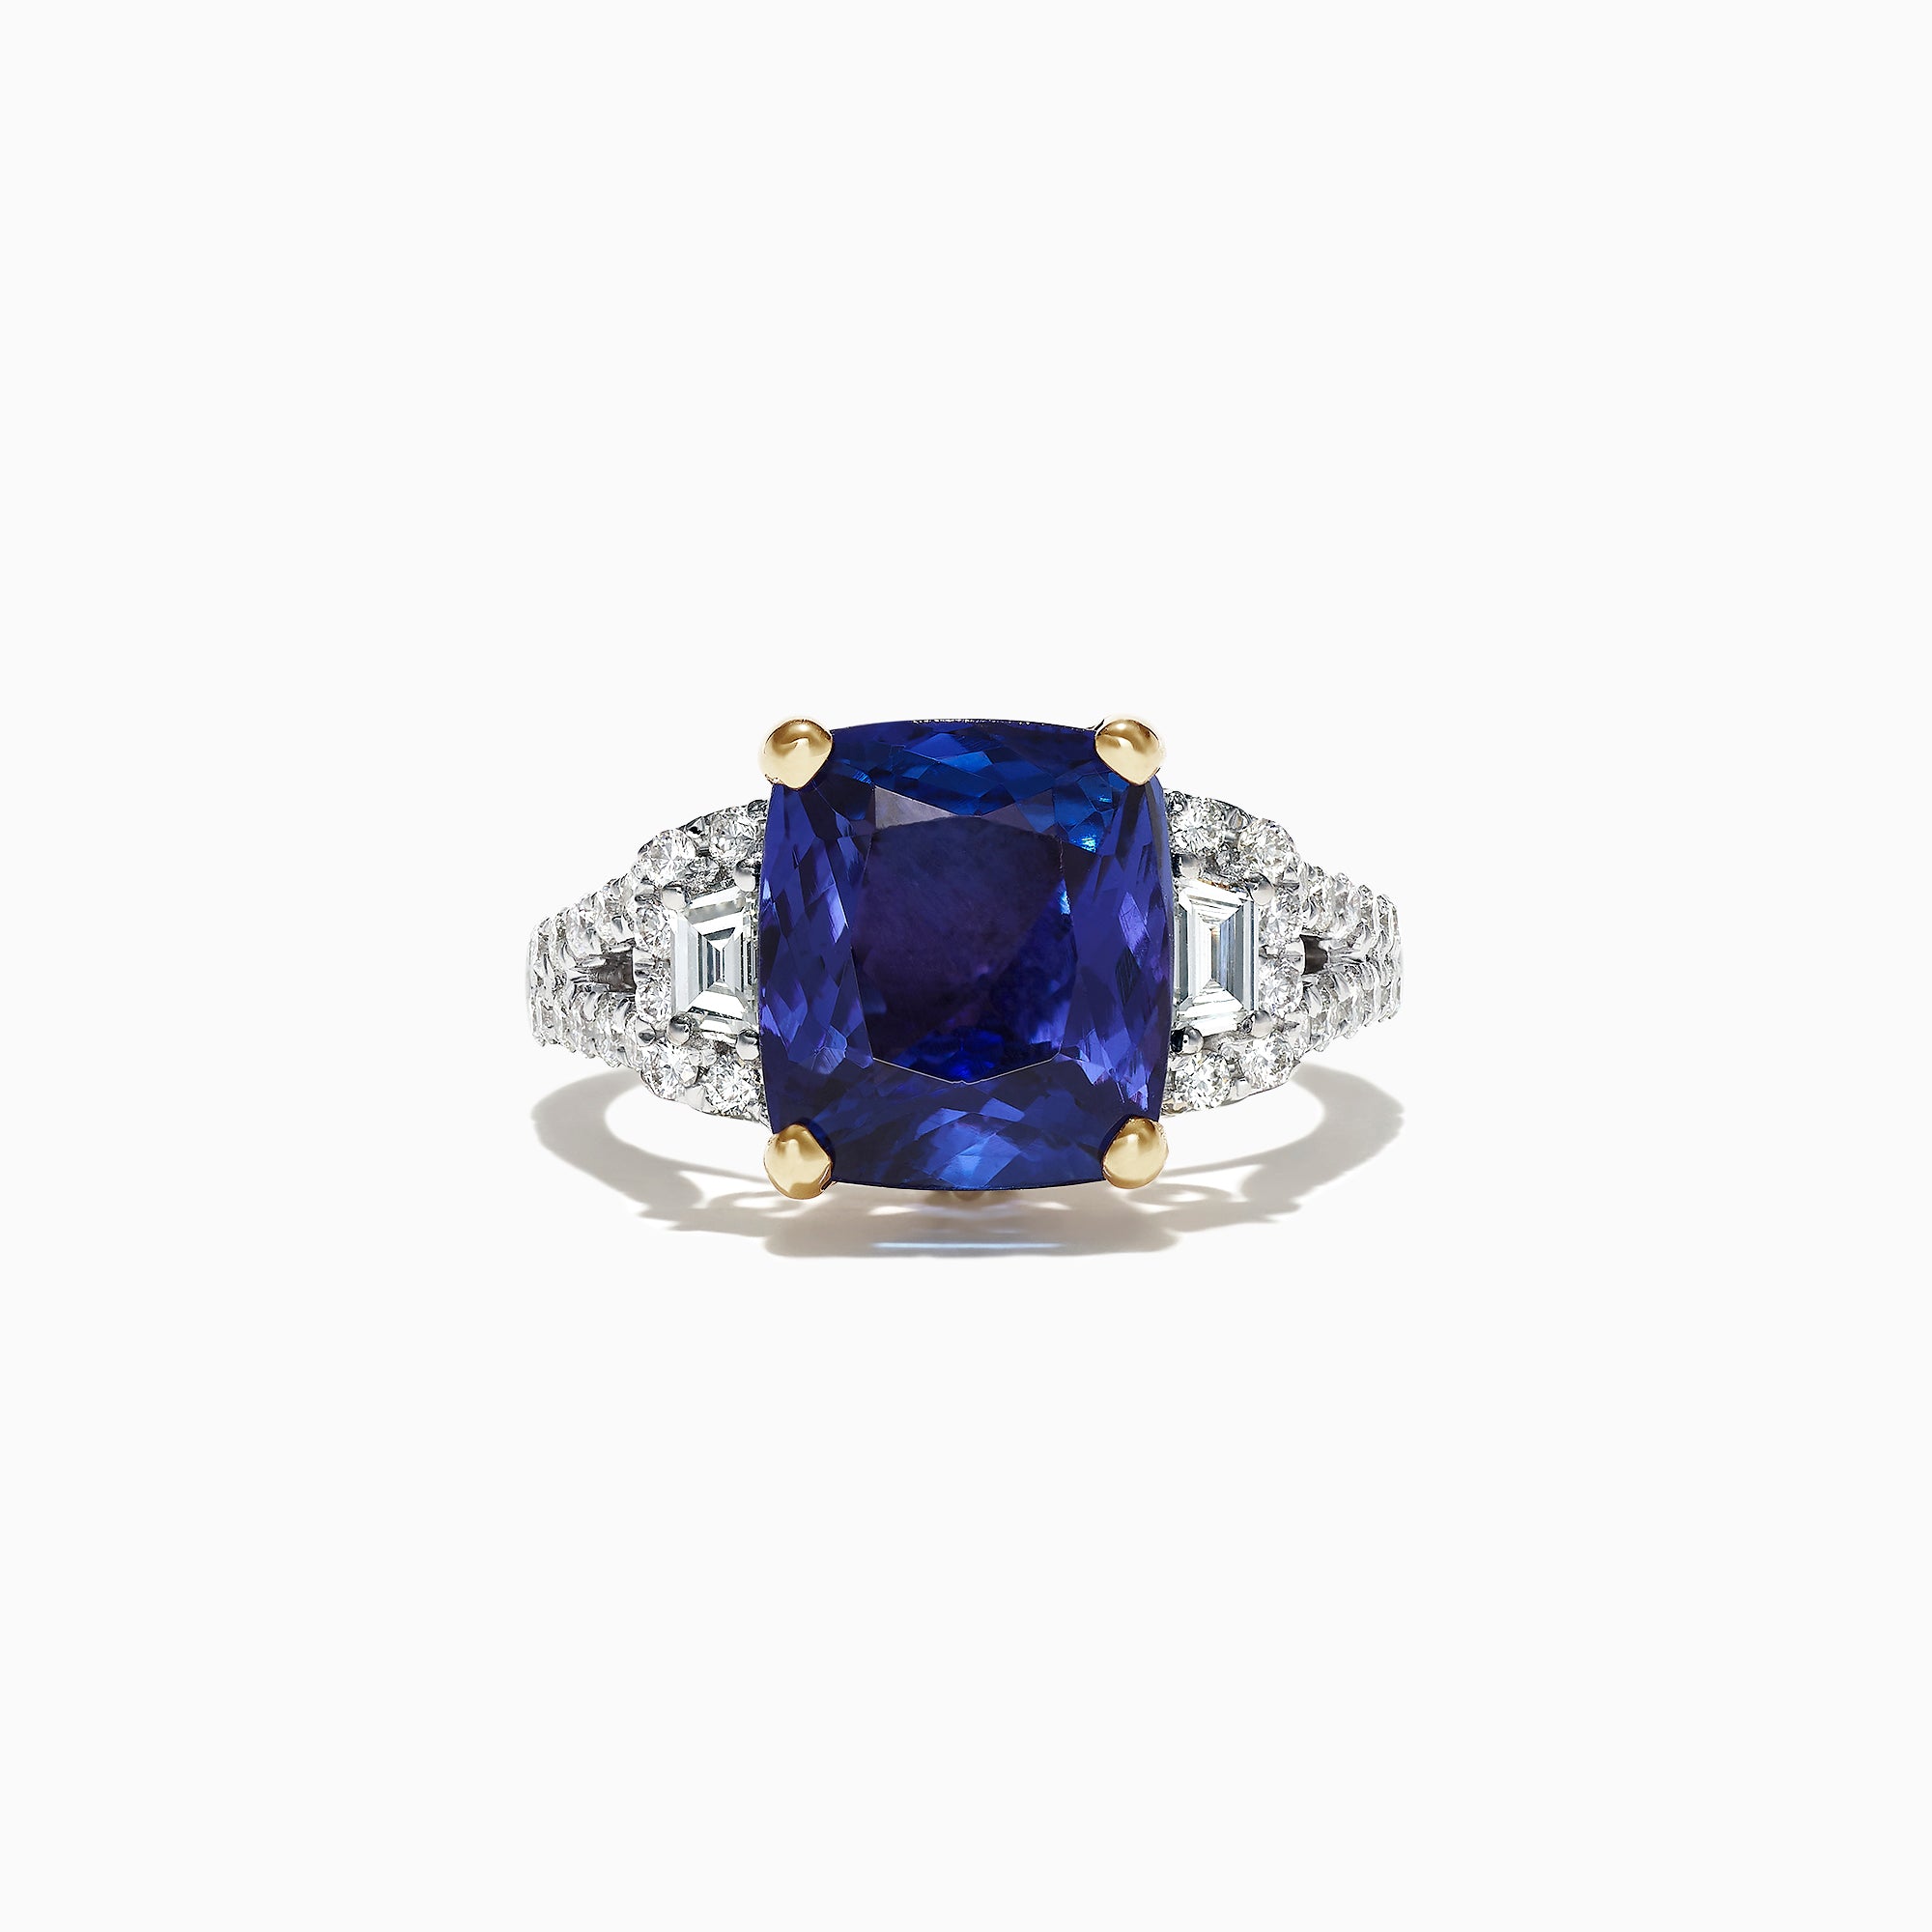 Effy Limited Edition 18K Two Tone Gold Tanzanite and Diamond Ring, 4.52 TCW